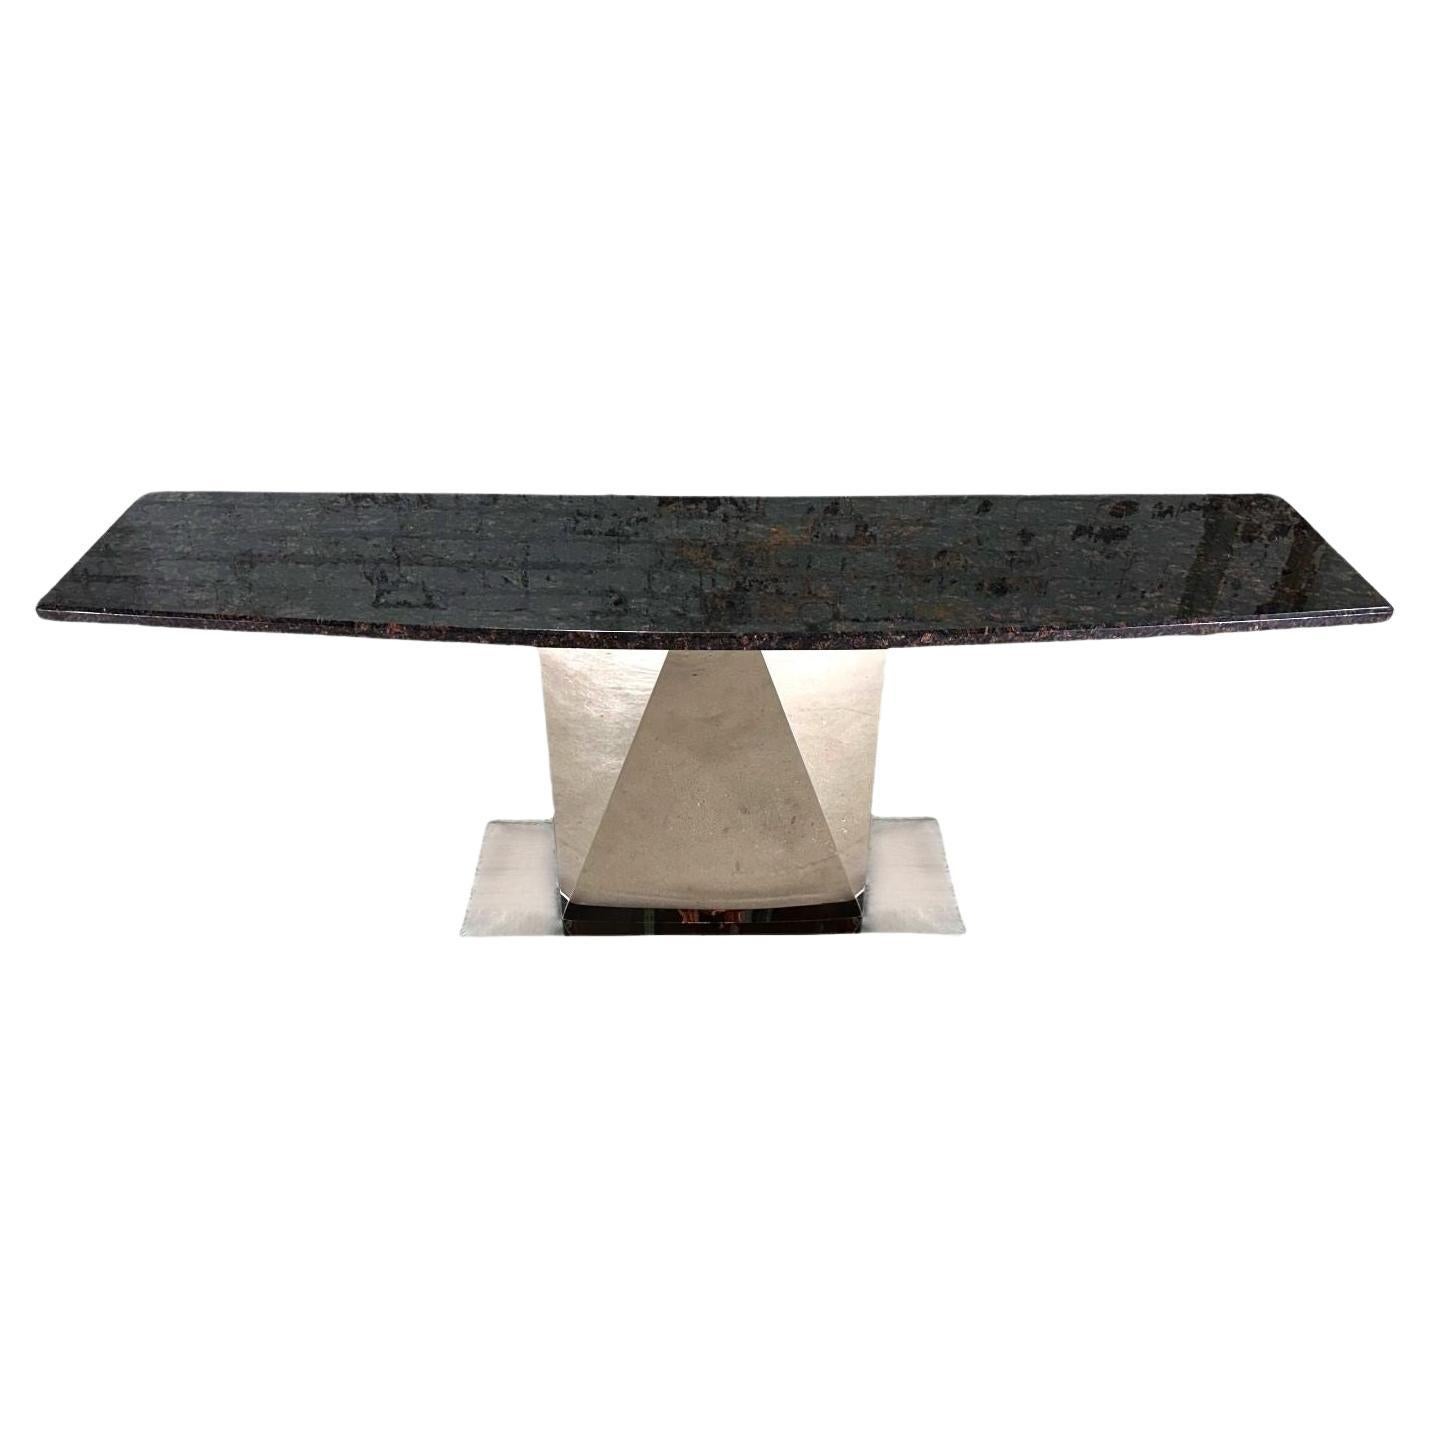 Sally Sirkin Style Multi Faceted Stainless Steel/Granite Console, 1970 For Sale